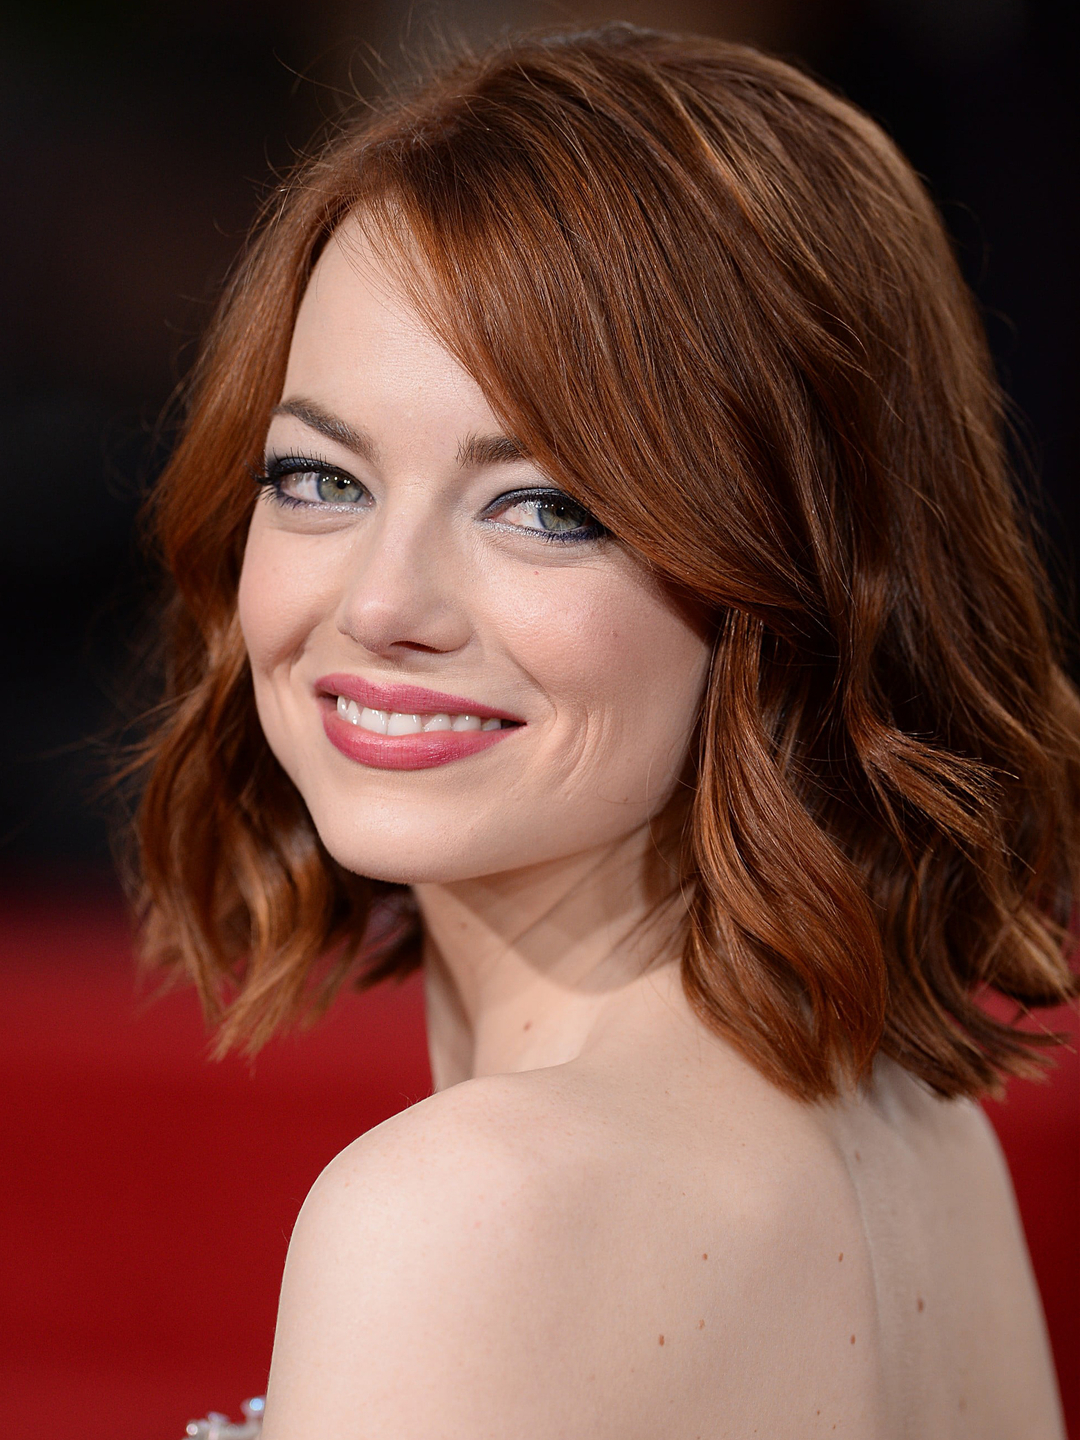 Emma Stone in her youth